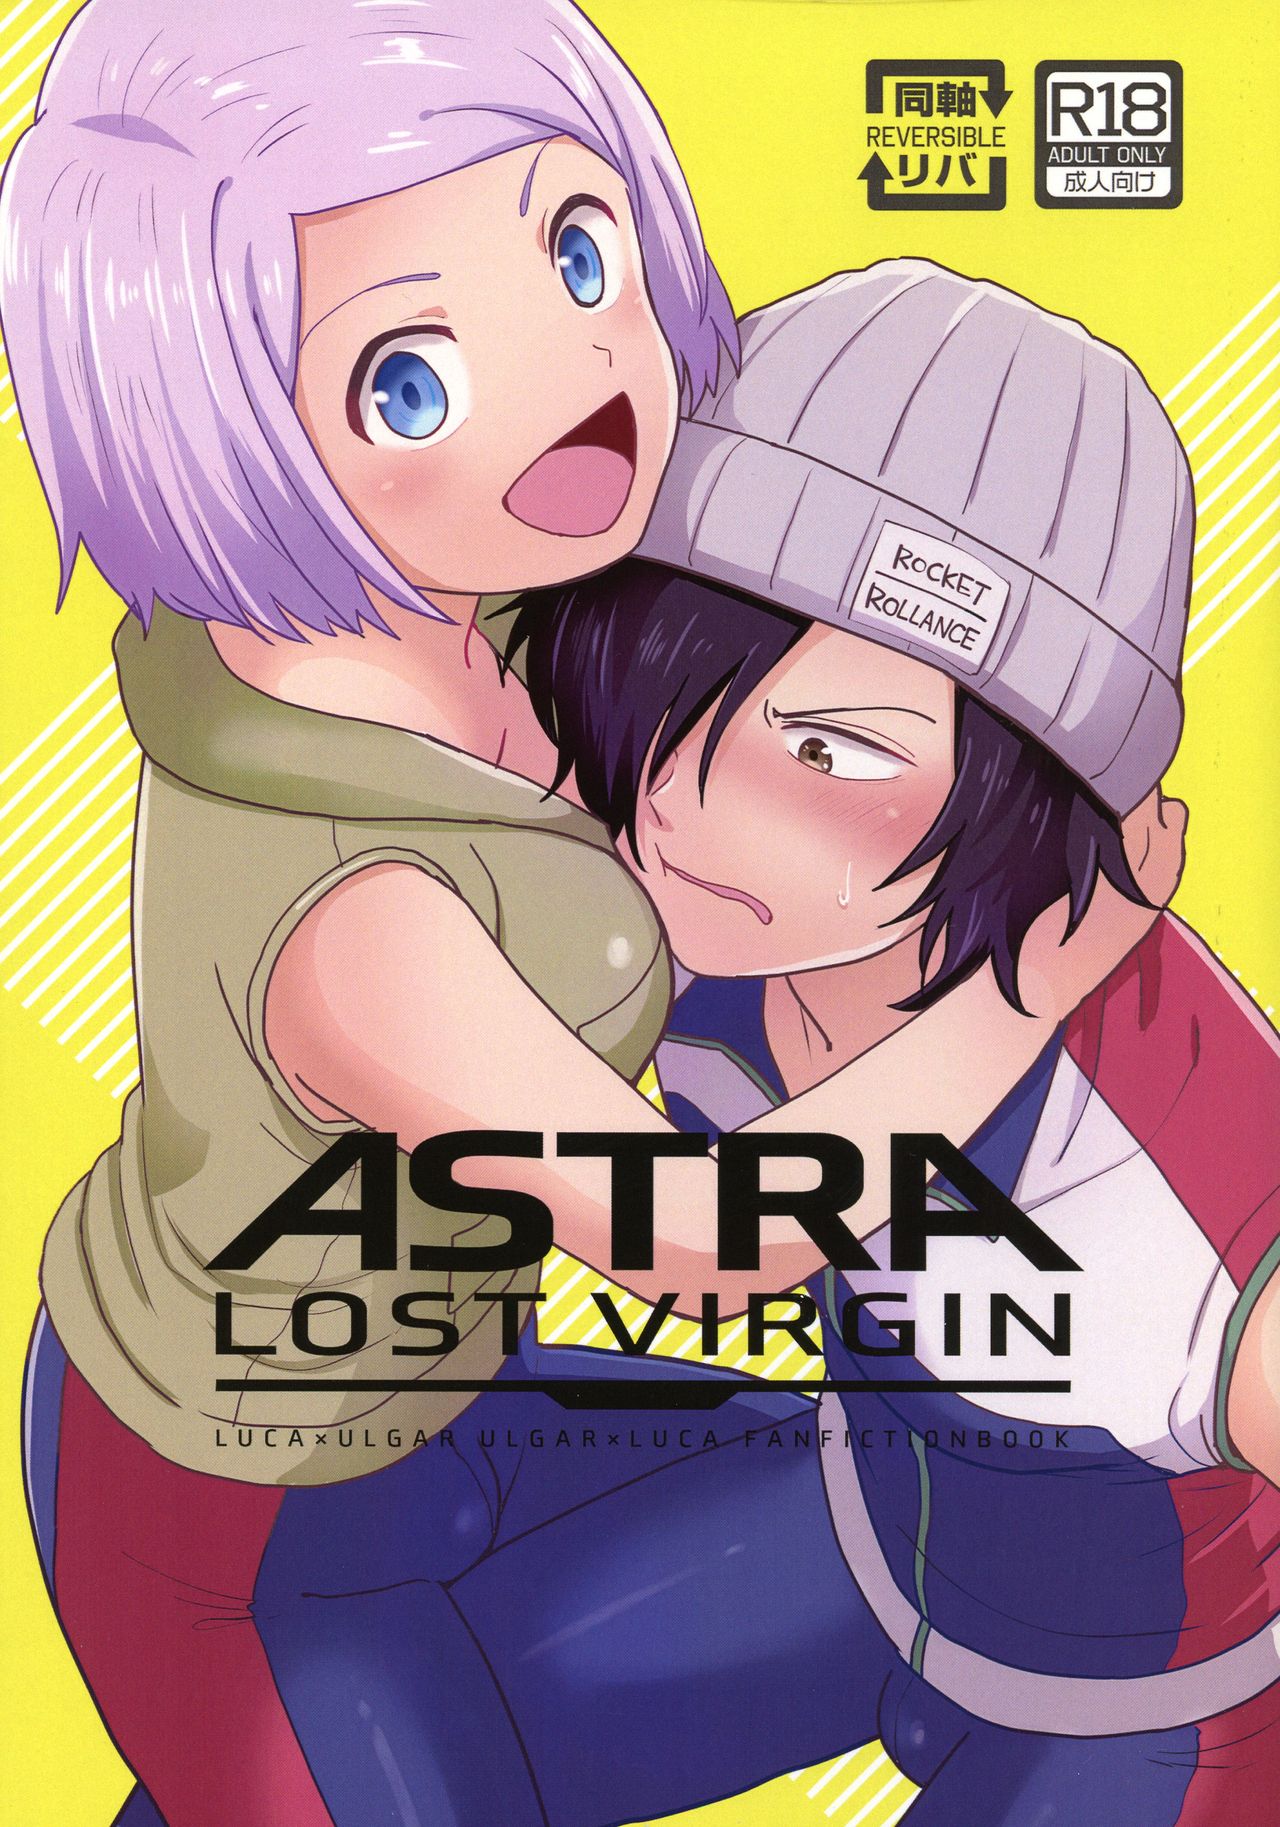 Astra lost in space hentai